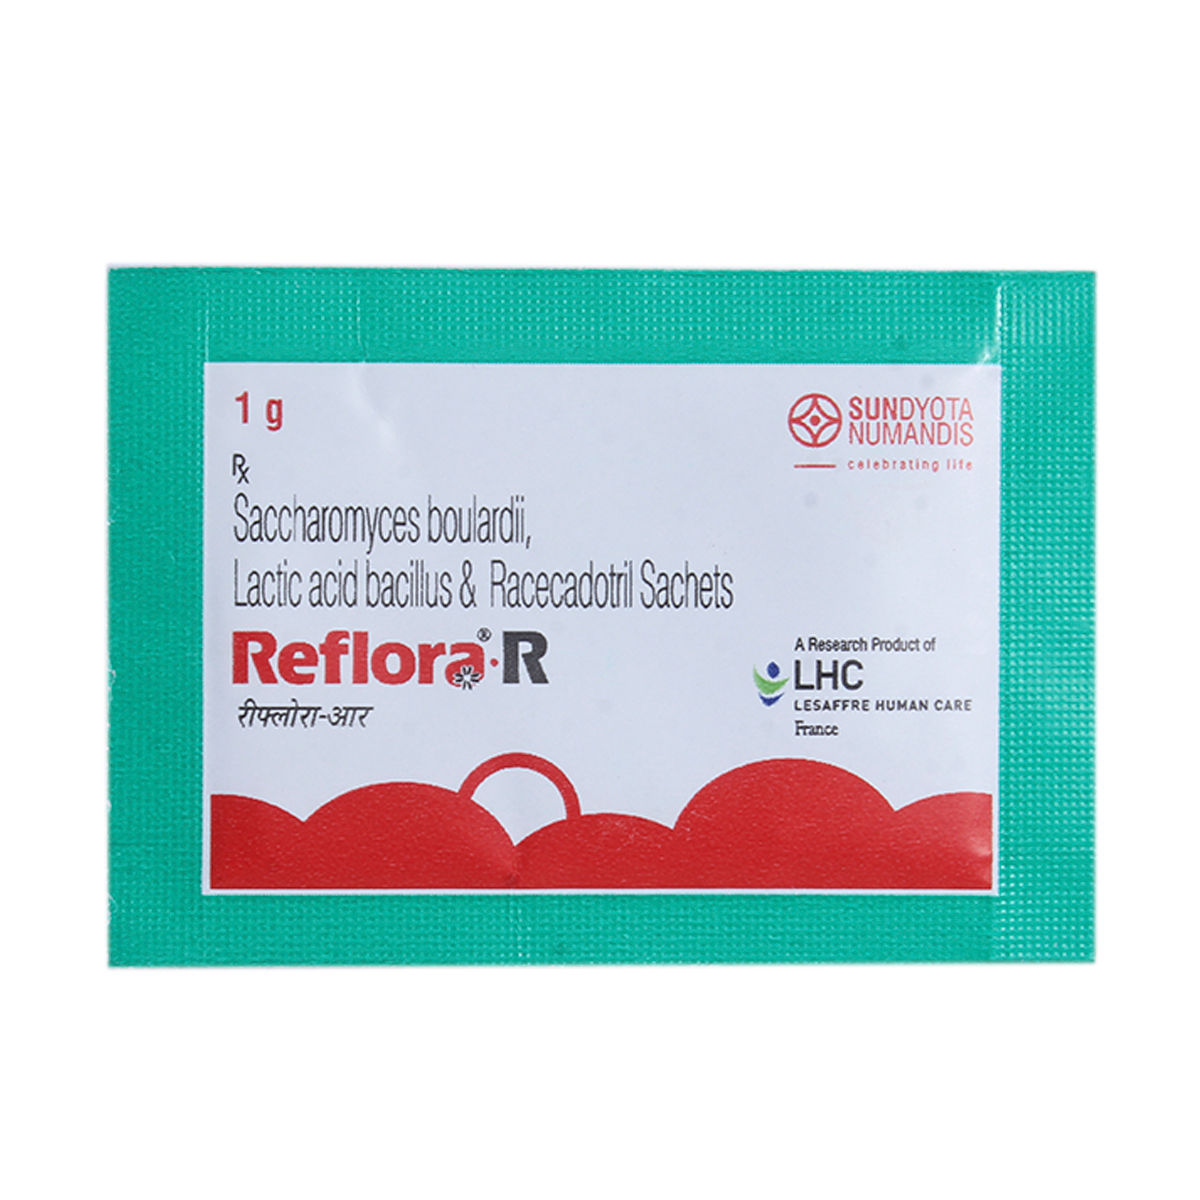 Reflora-R Sachet 1 gm Price, Uses, Side Effects, Composition ...